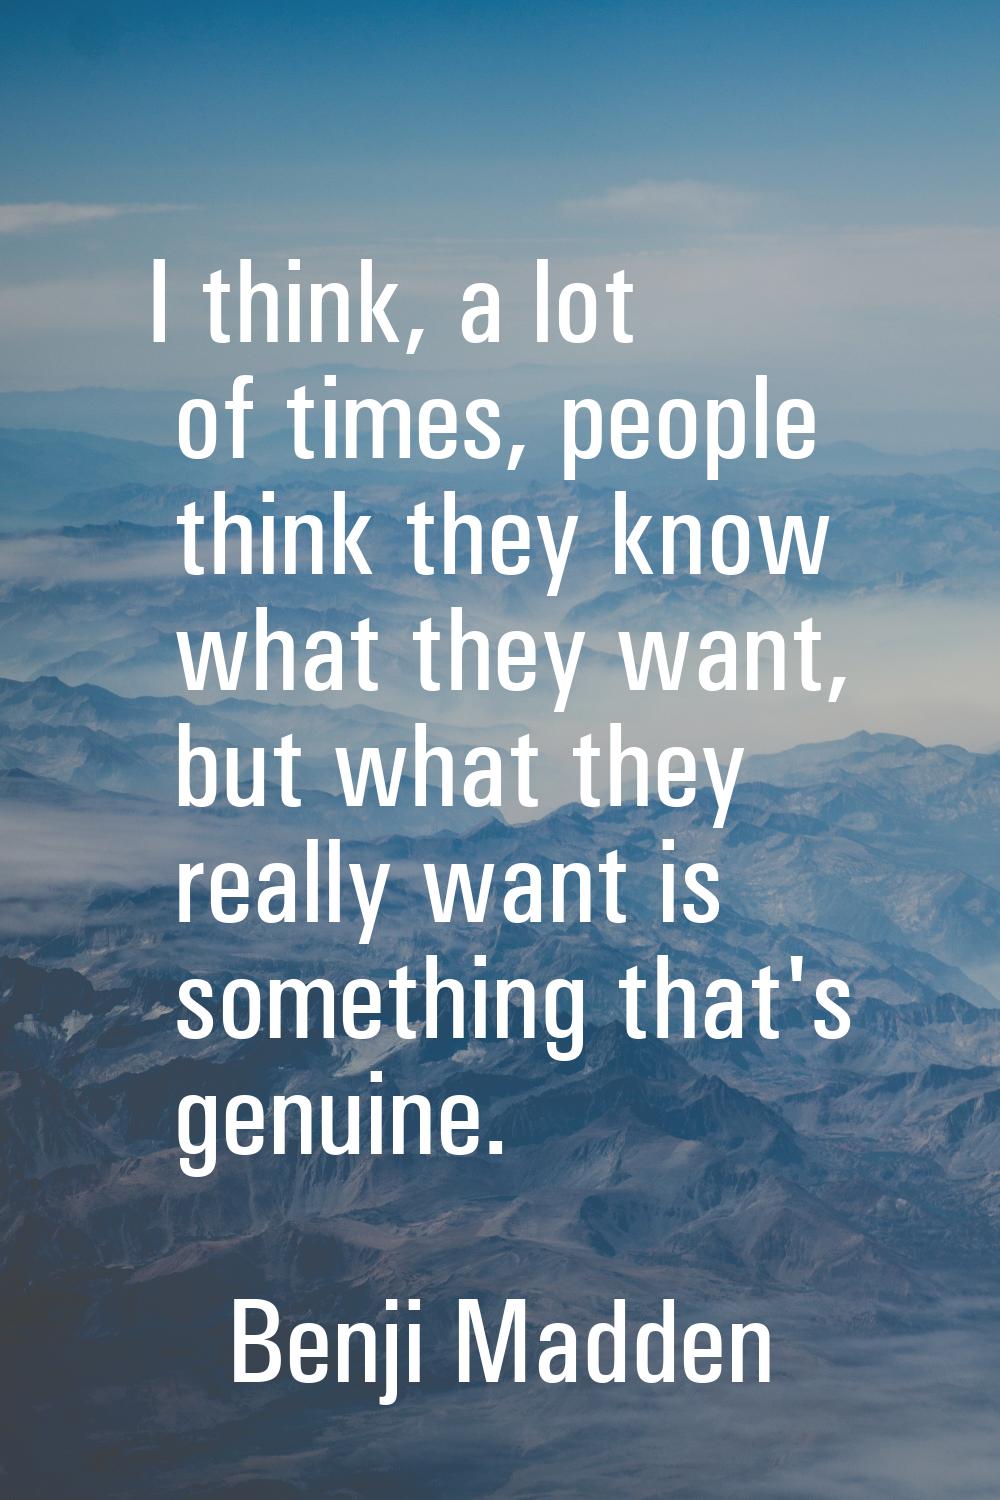 I think, a lot of times, people think they know what they want, but what they really want is someth